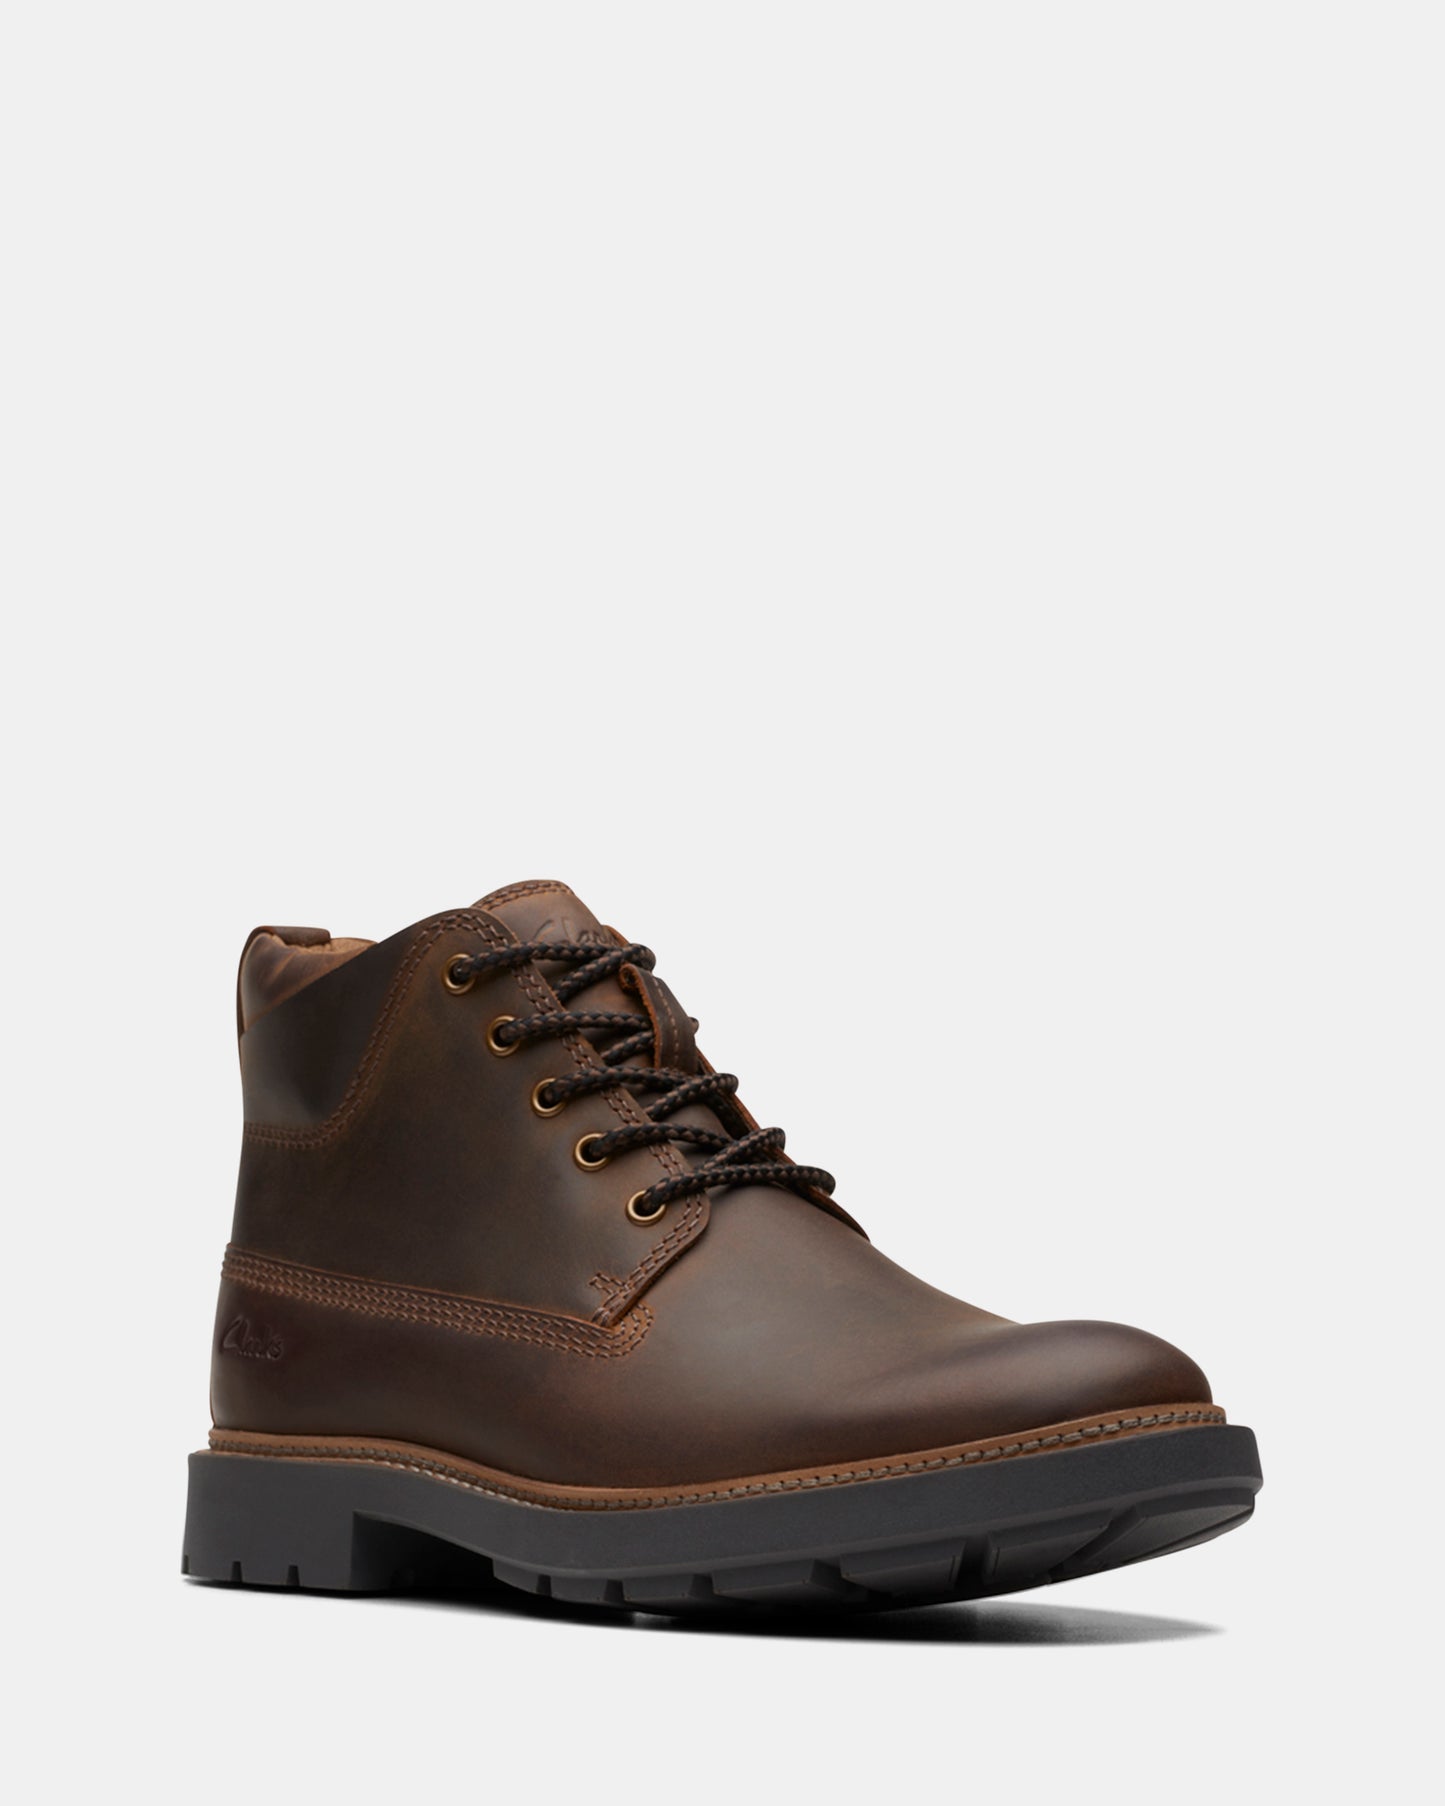 Craftdale2 Mid Beeswax Leather